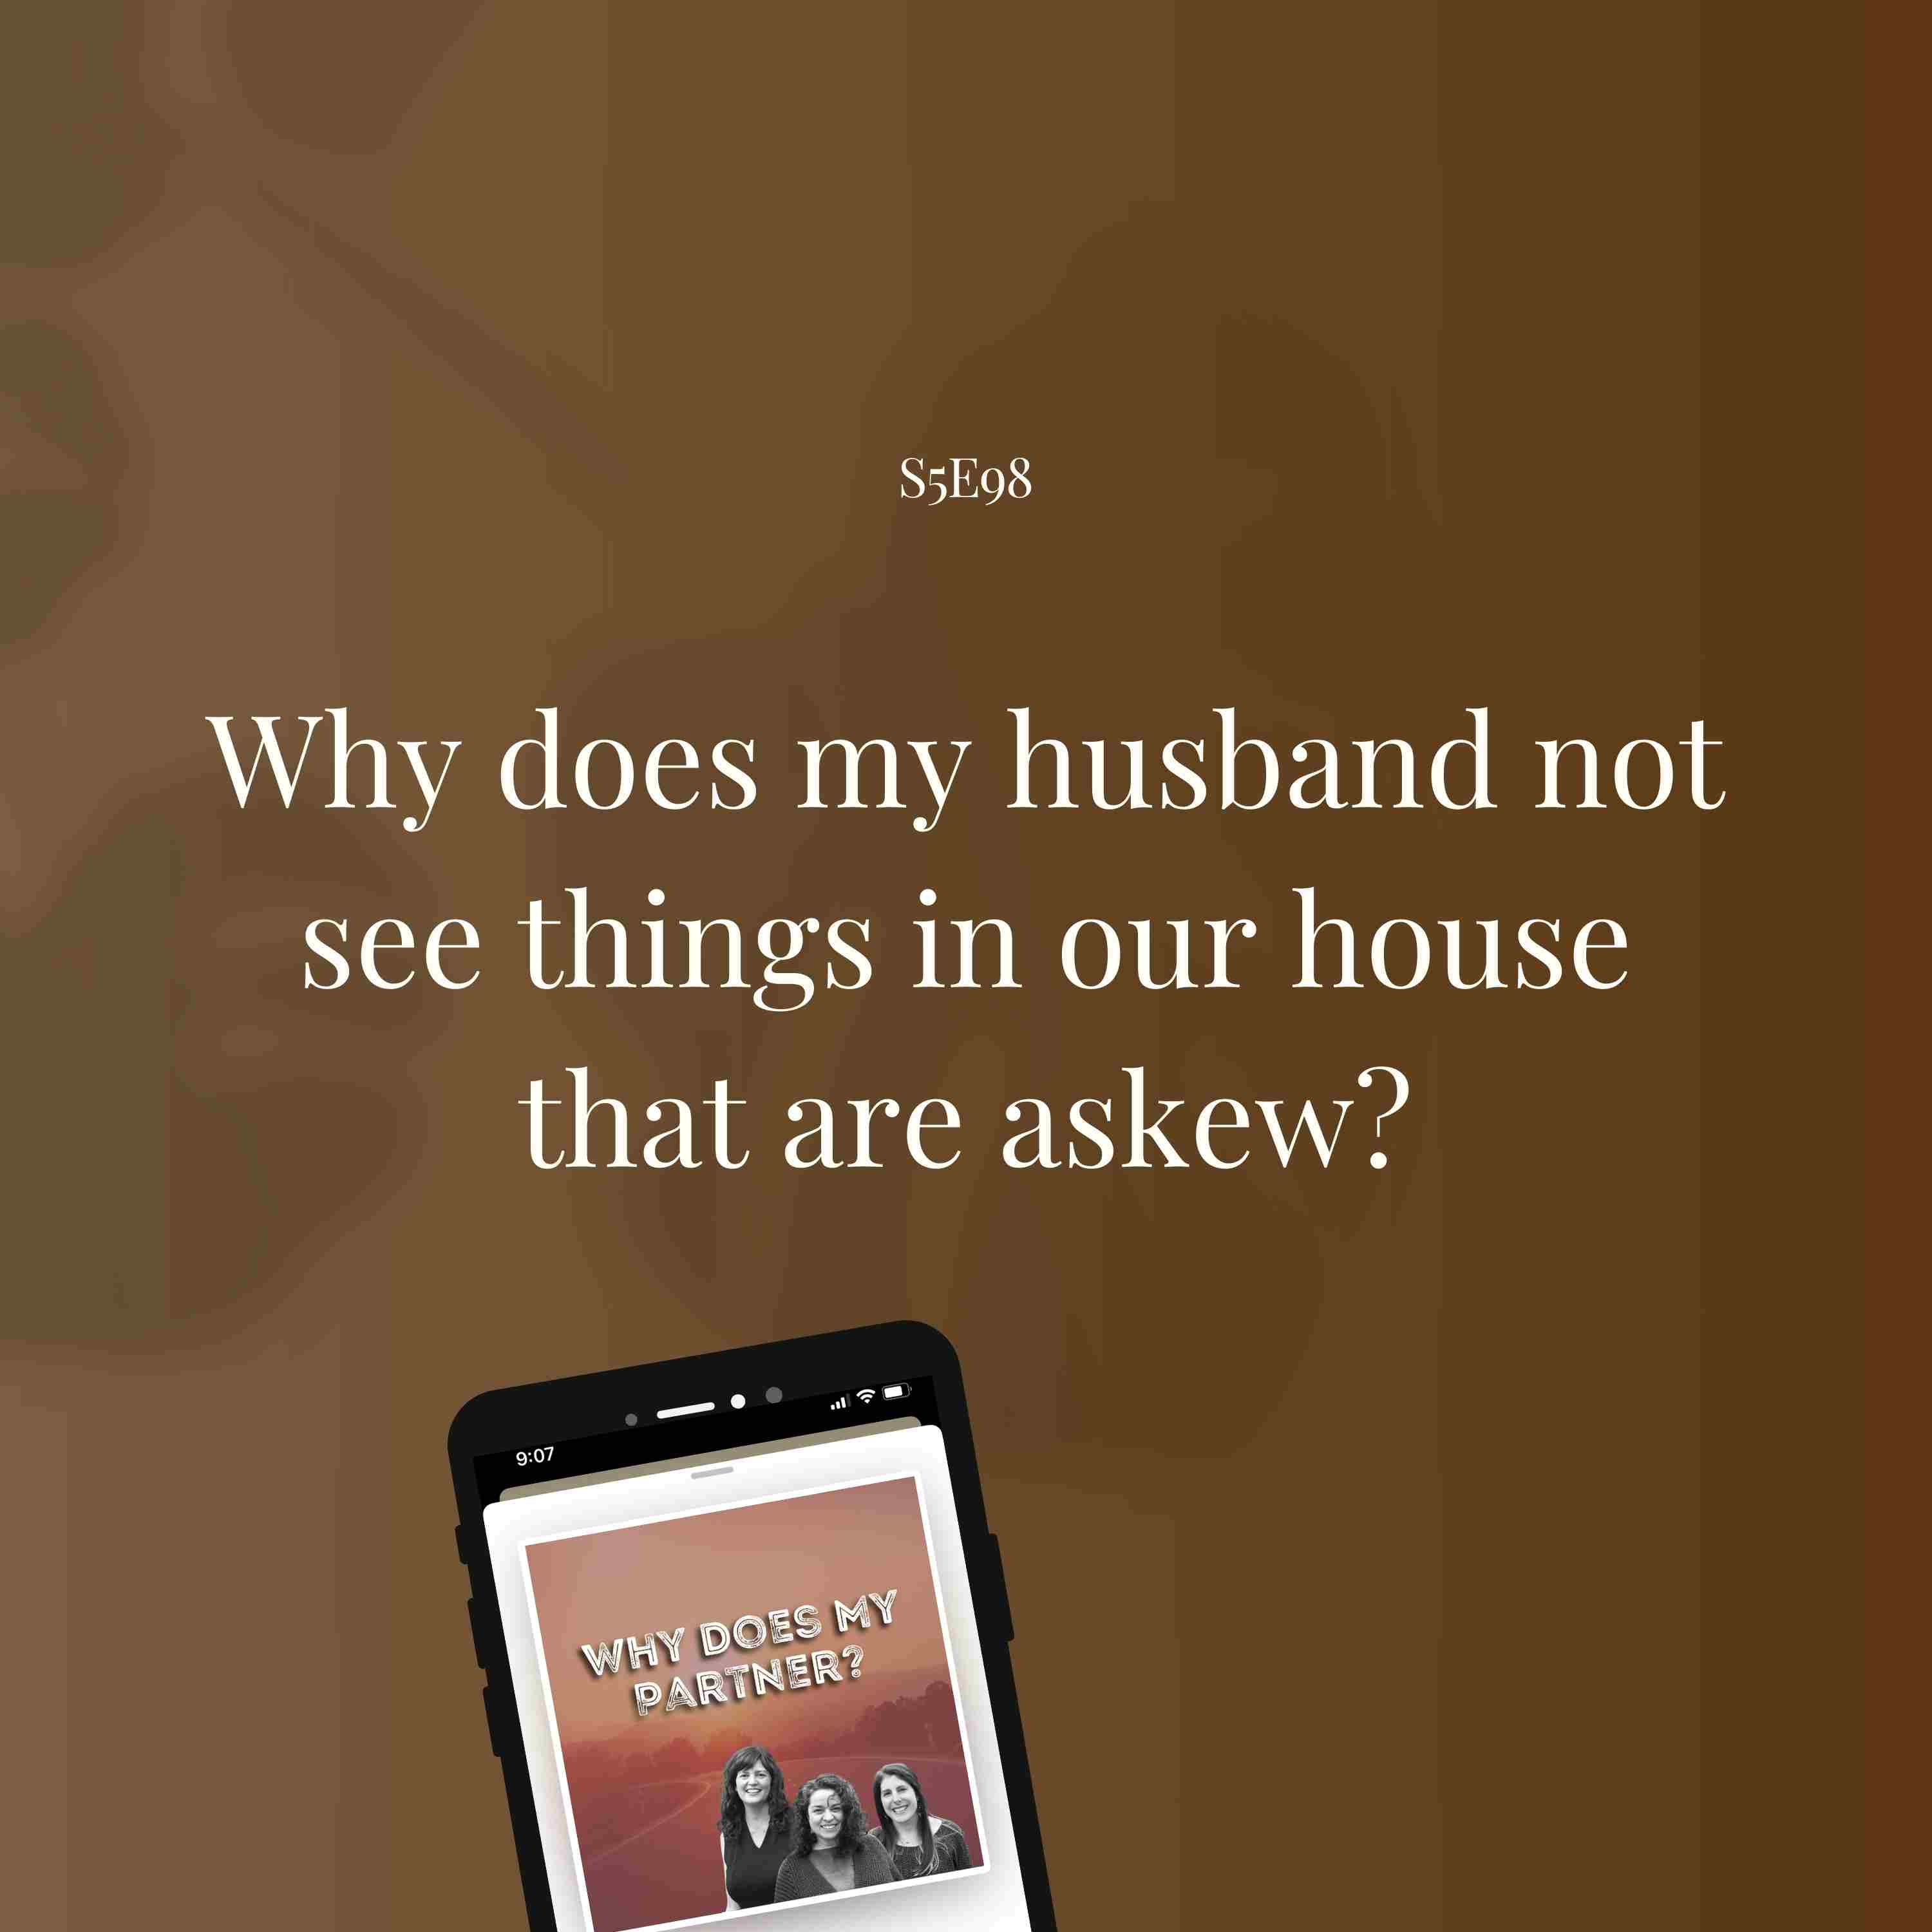 Why does my husband not see things in our house that are askew?